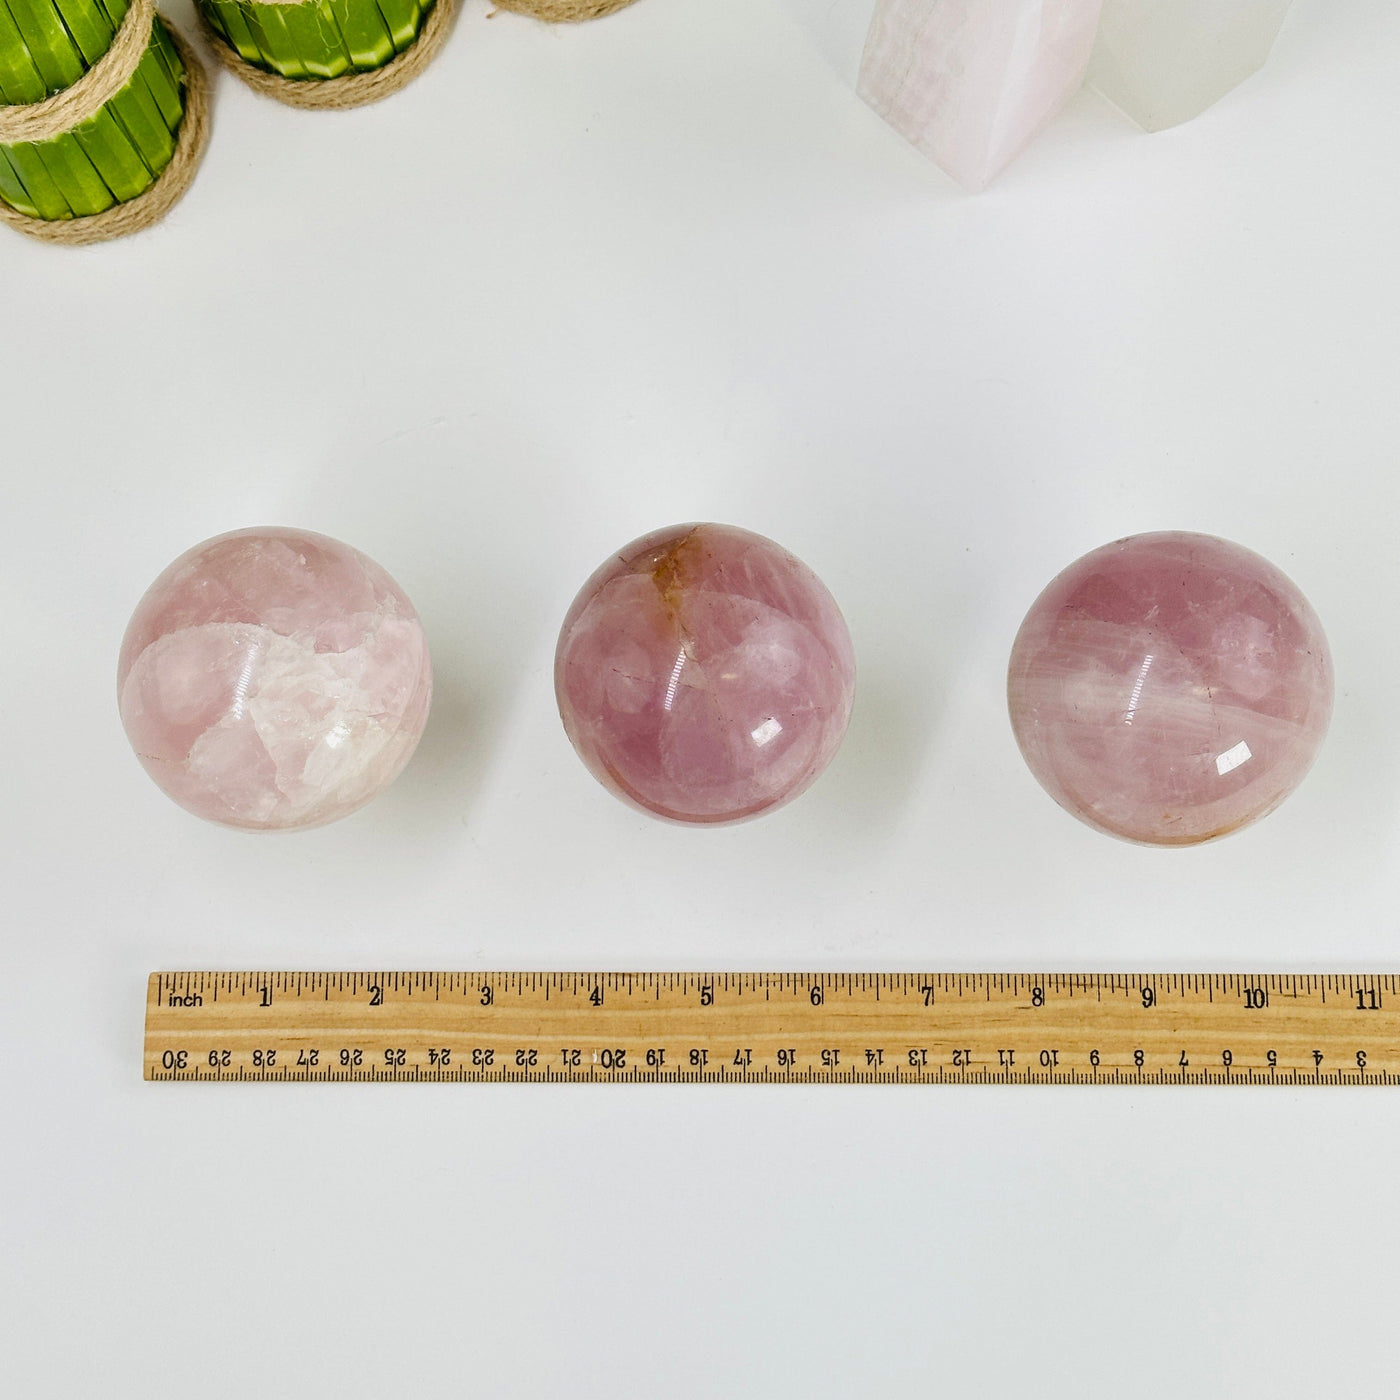 rose quartz spheres next to a ruler for size reference